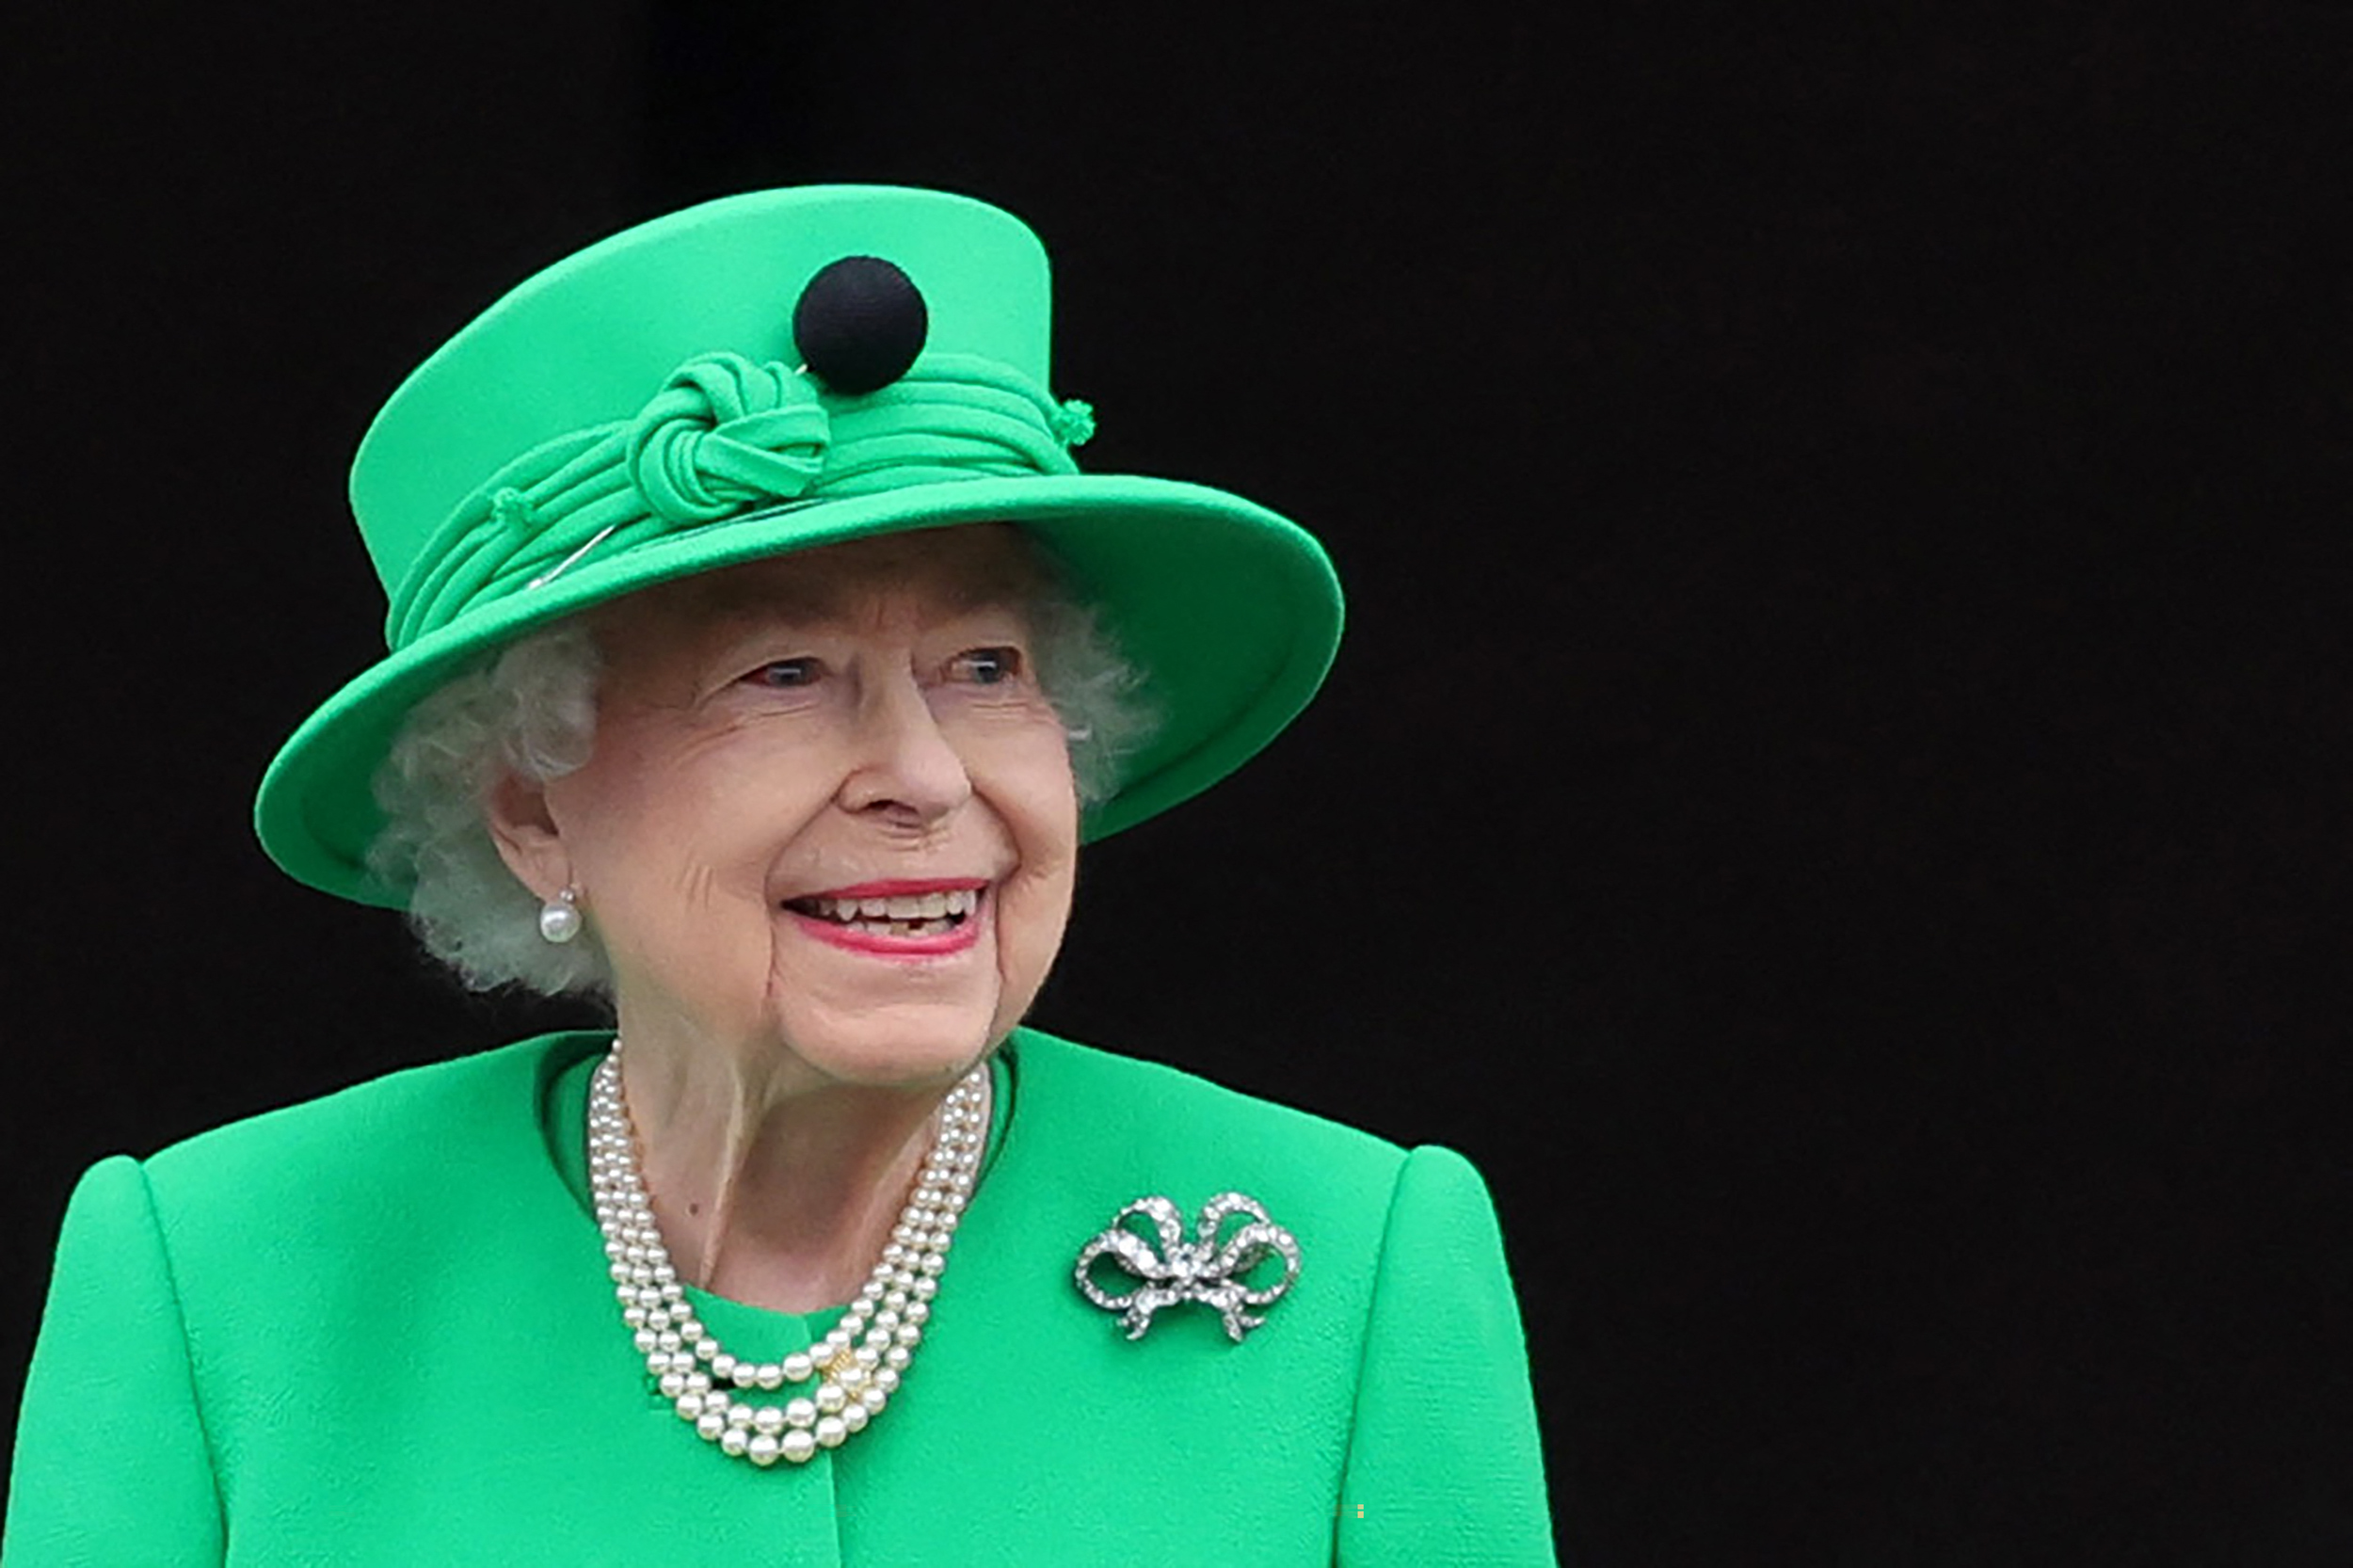 Queen Elizabeth II, who advocated for climate action, dies at 96